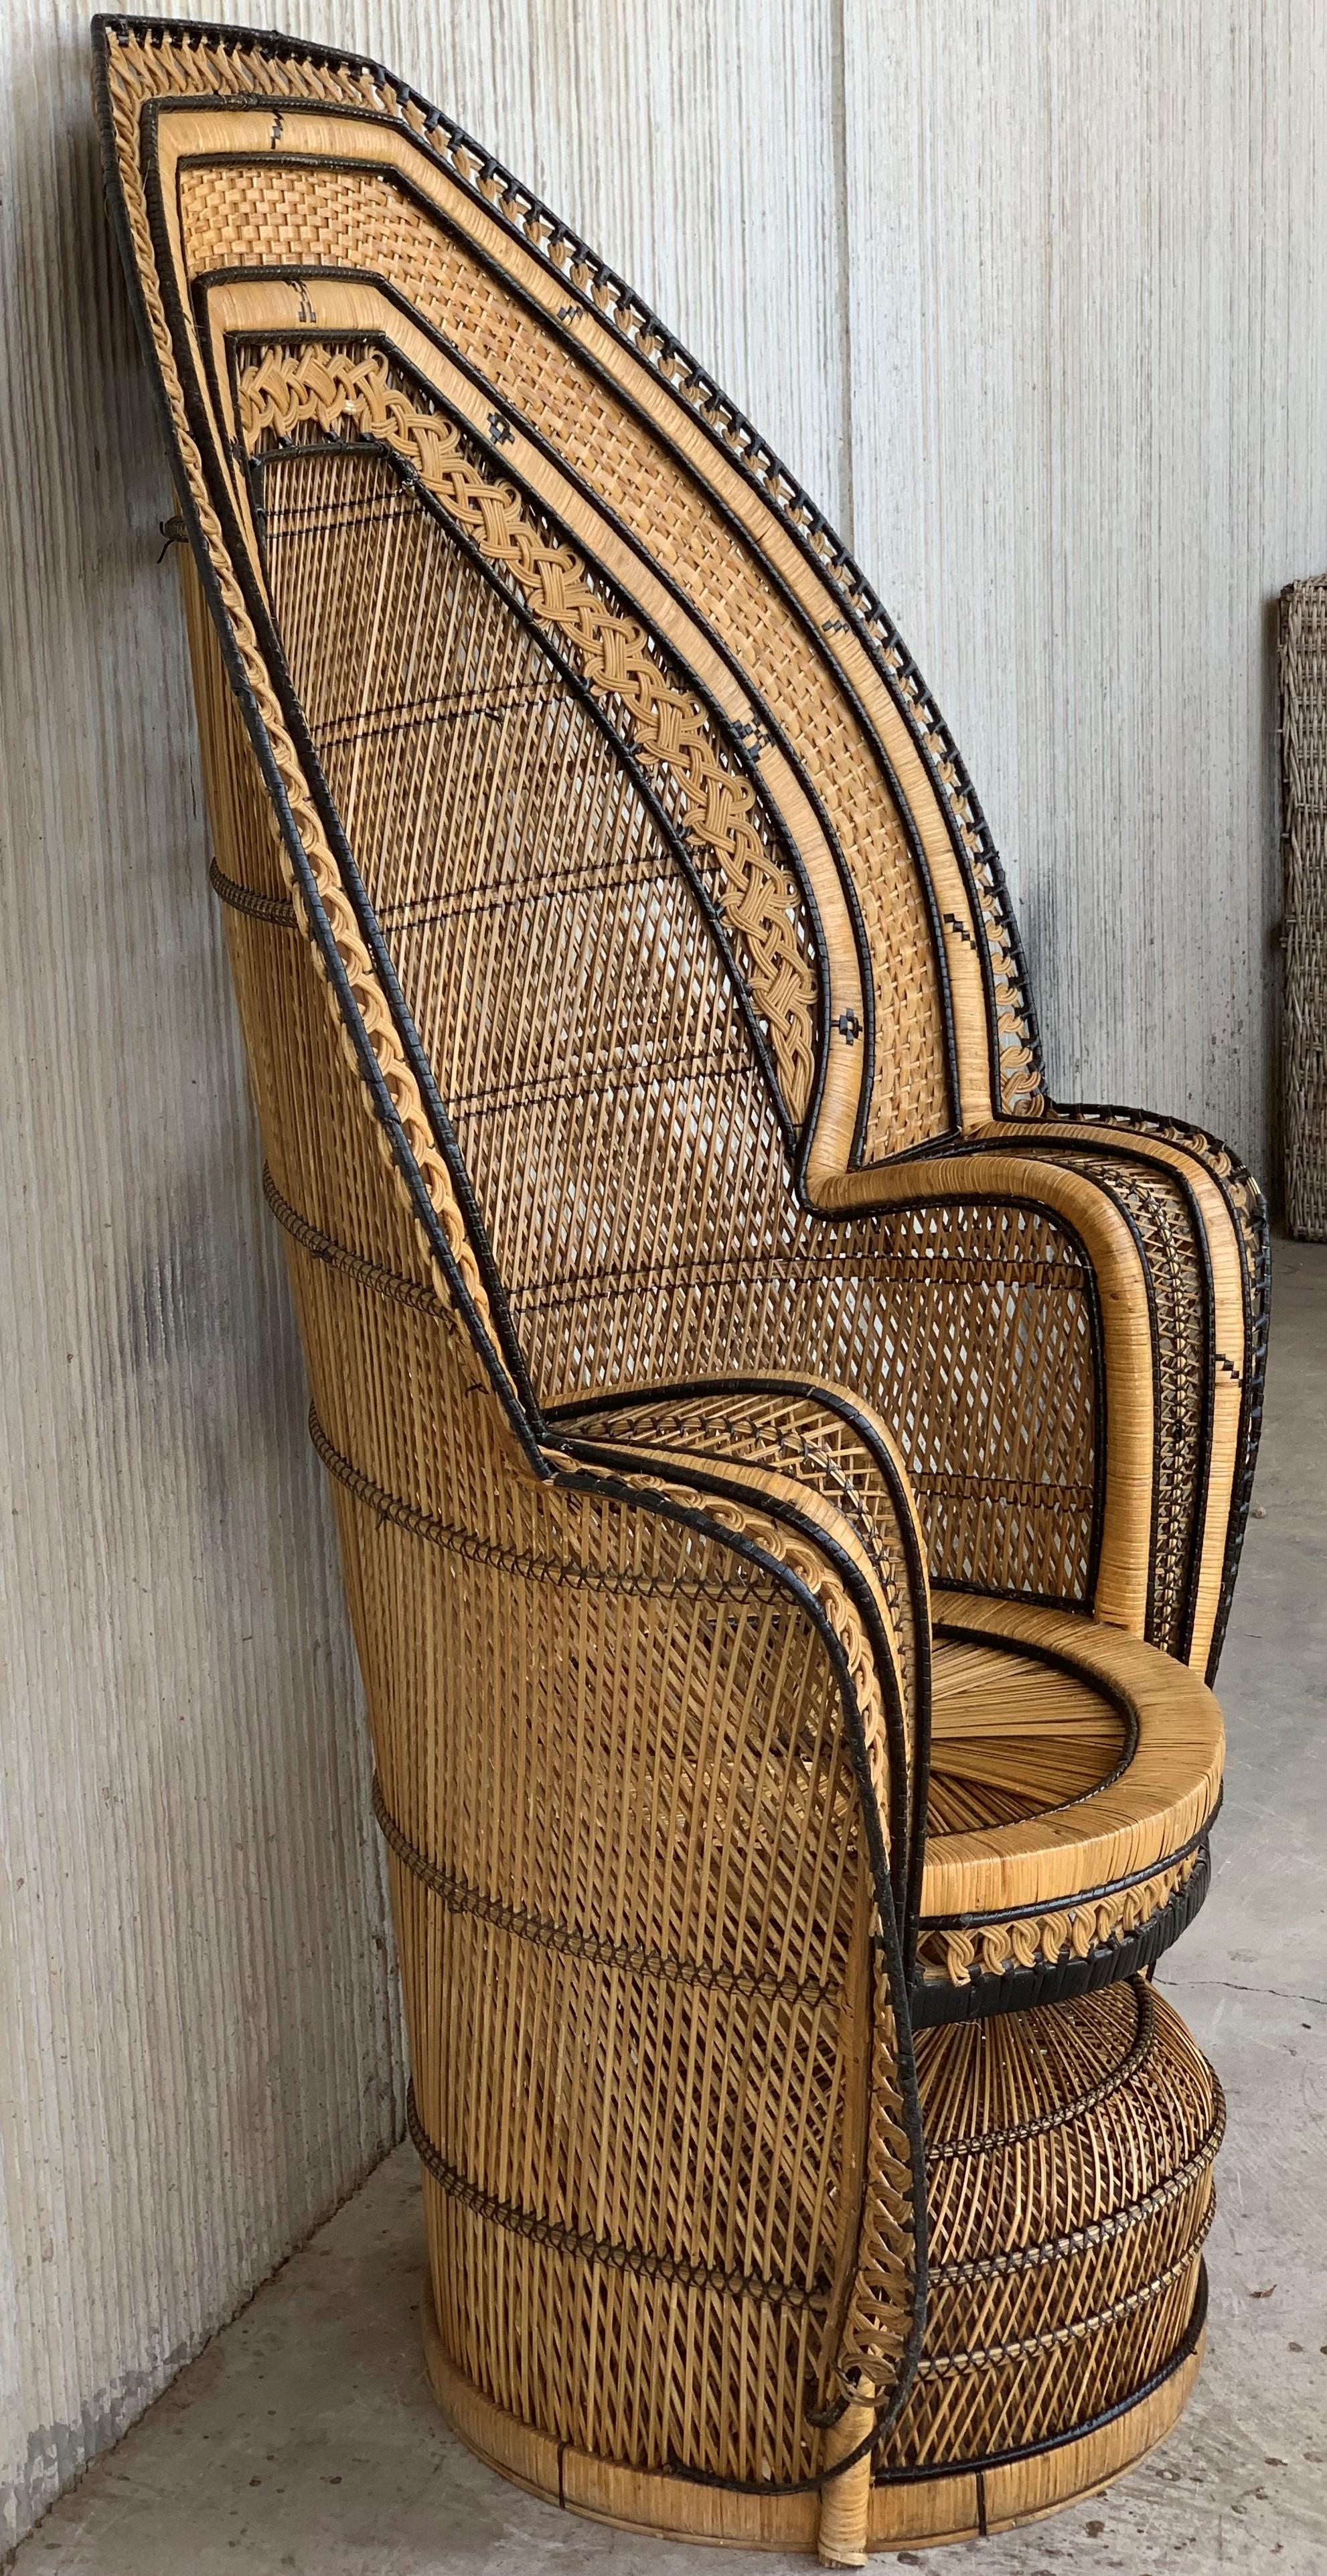 Vintage Handcrafted Wicker, Rattan and Reed Peacock Chair 3